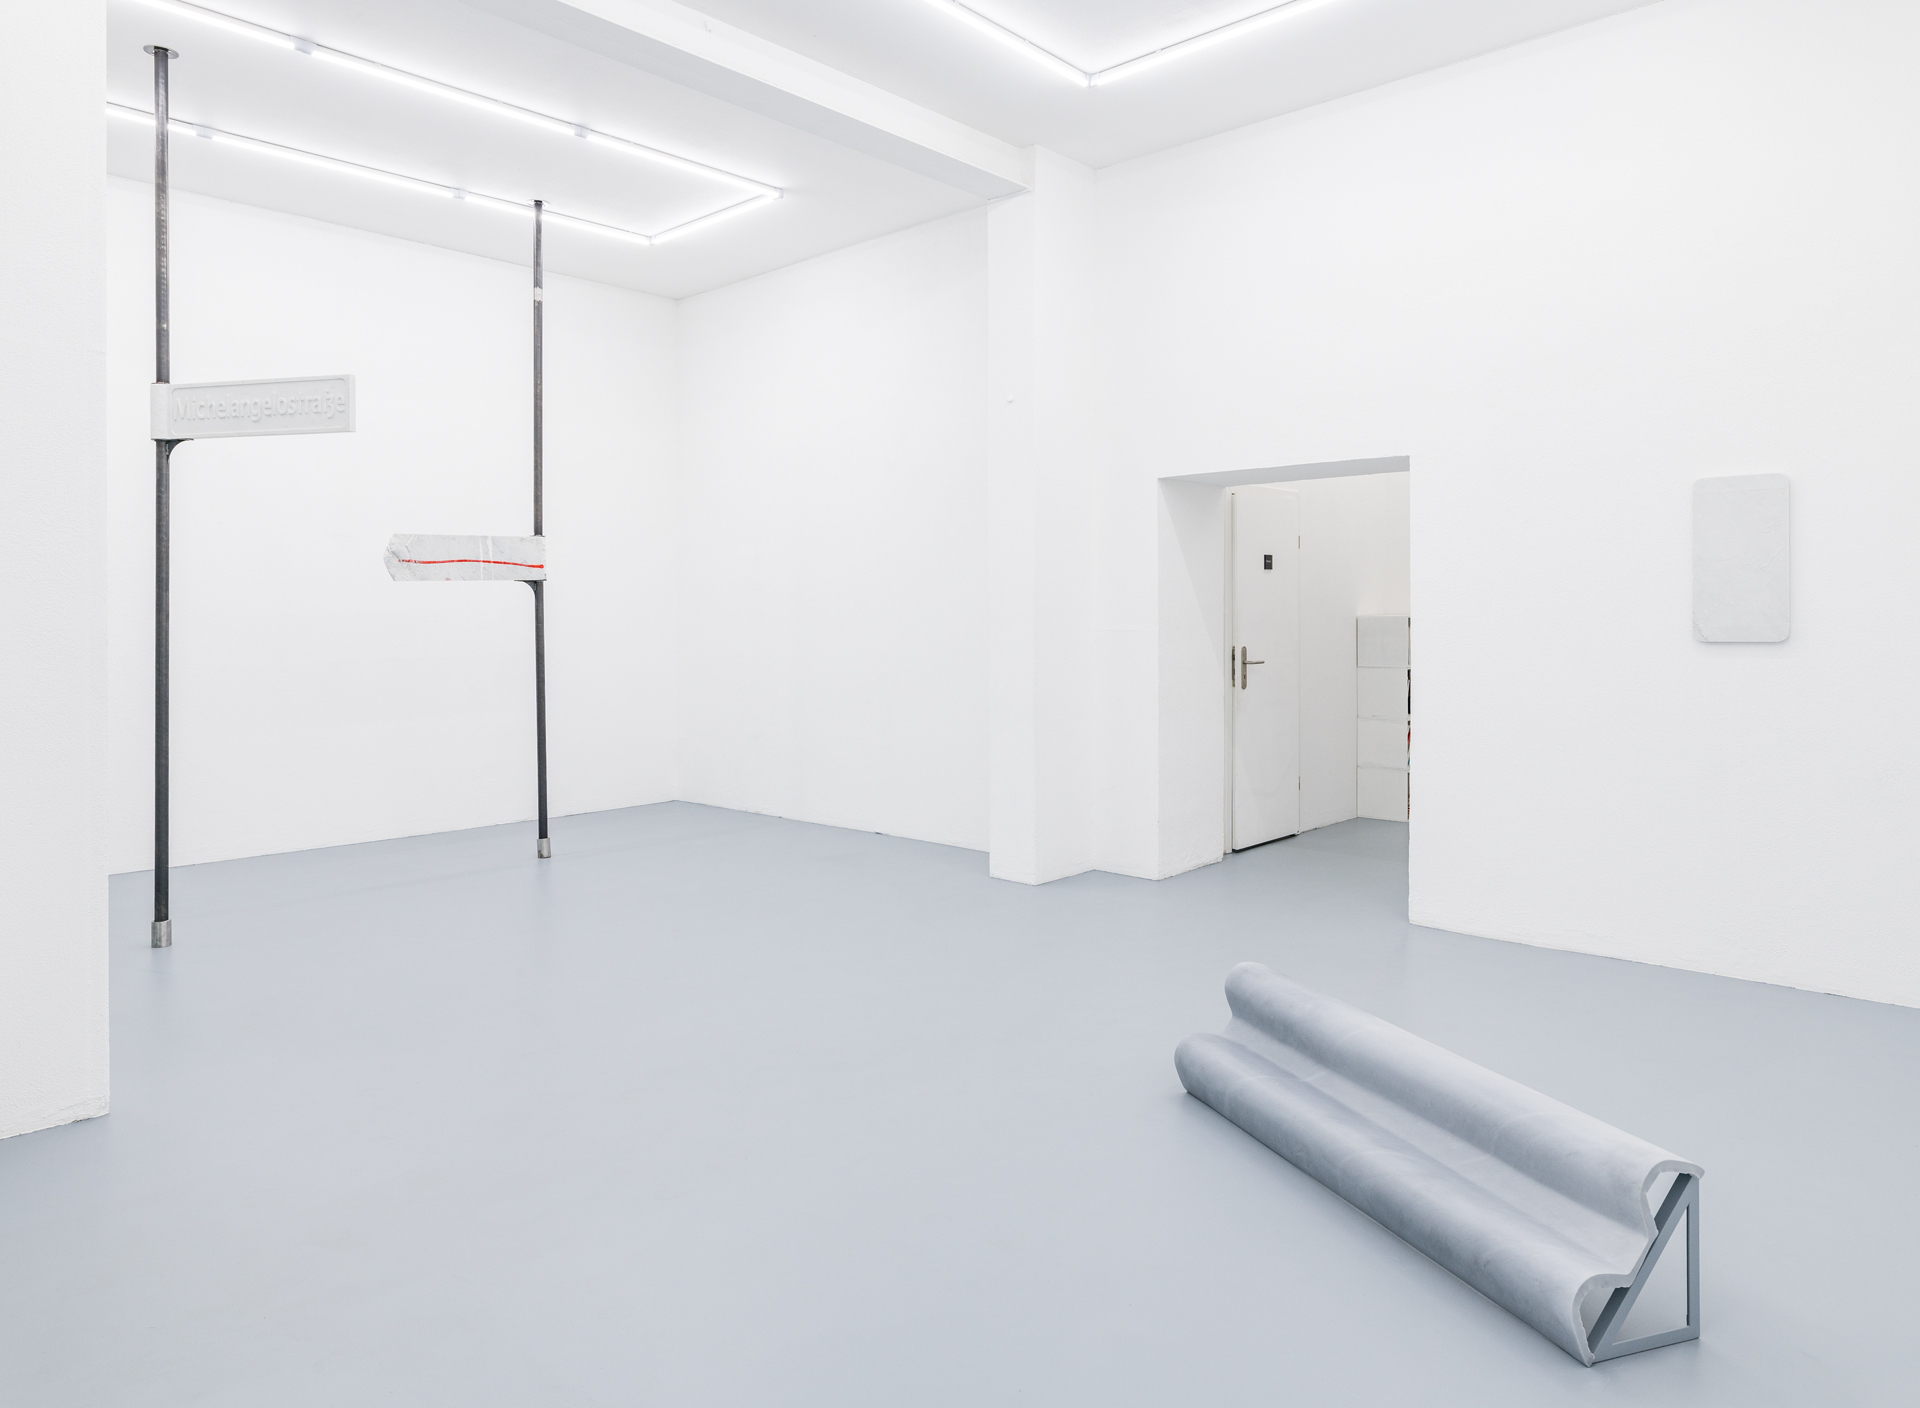 Lukas Liese, Whose Street installation view, 2021, Marble, variable Dimensions.